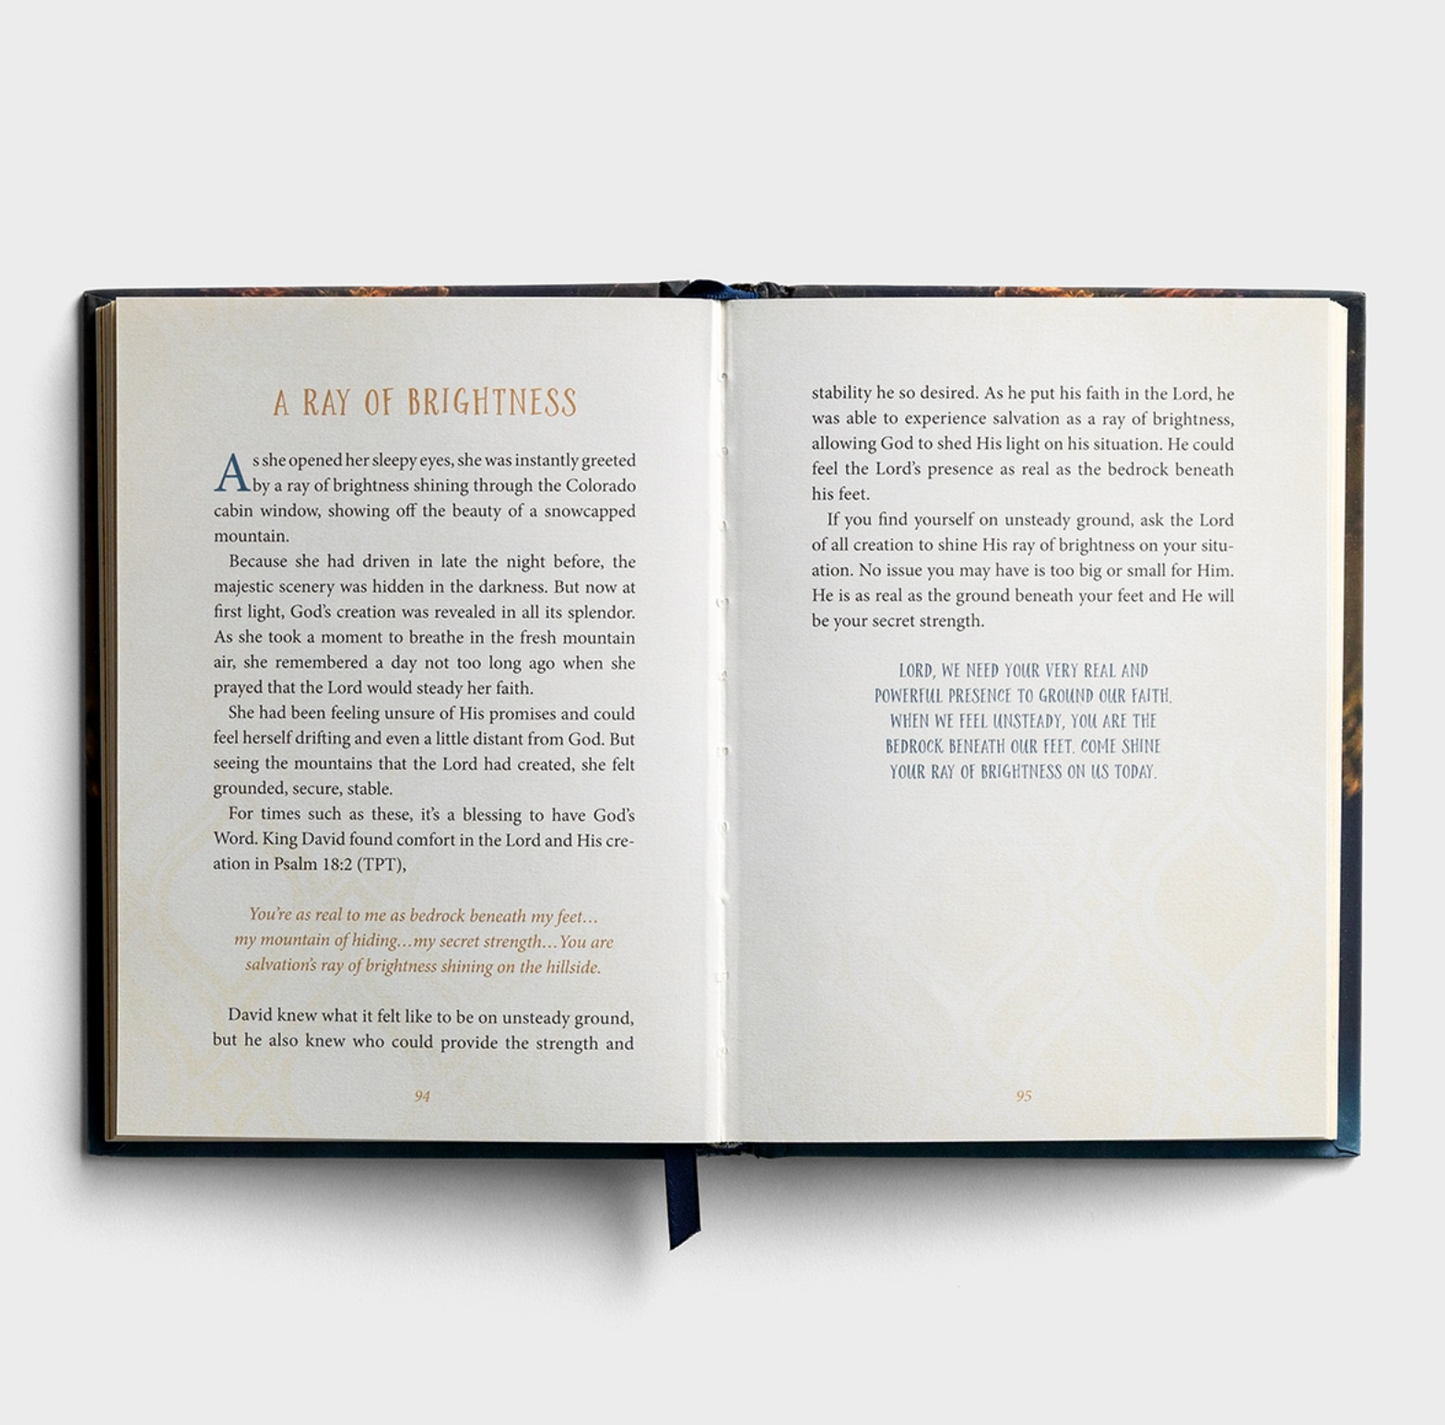 Made to Shine: 90 Devotions to Enjoy and Reflect God's Light